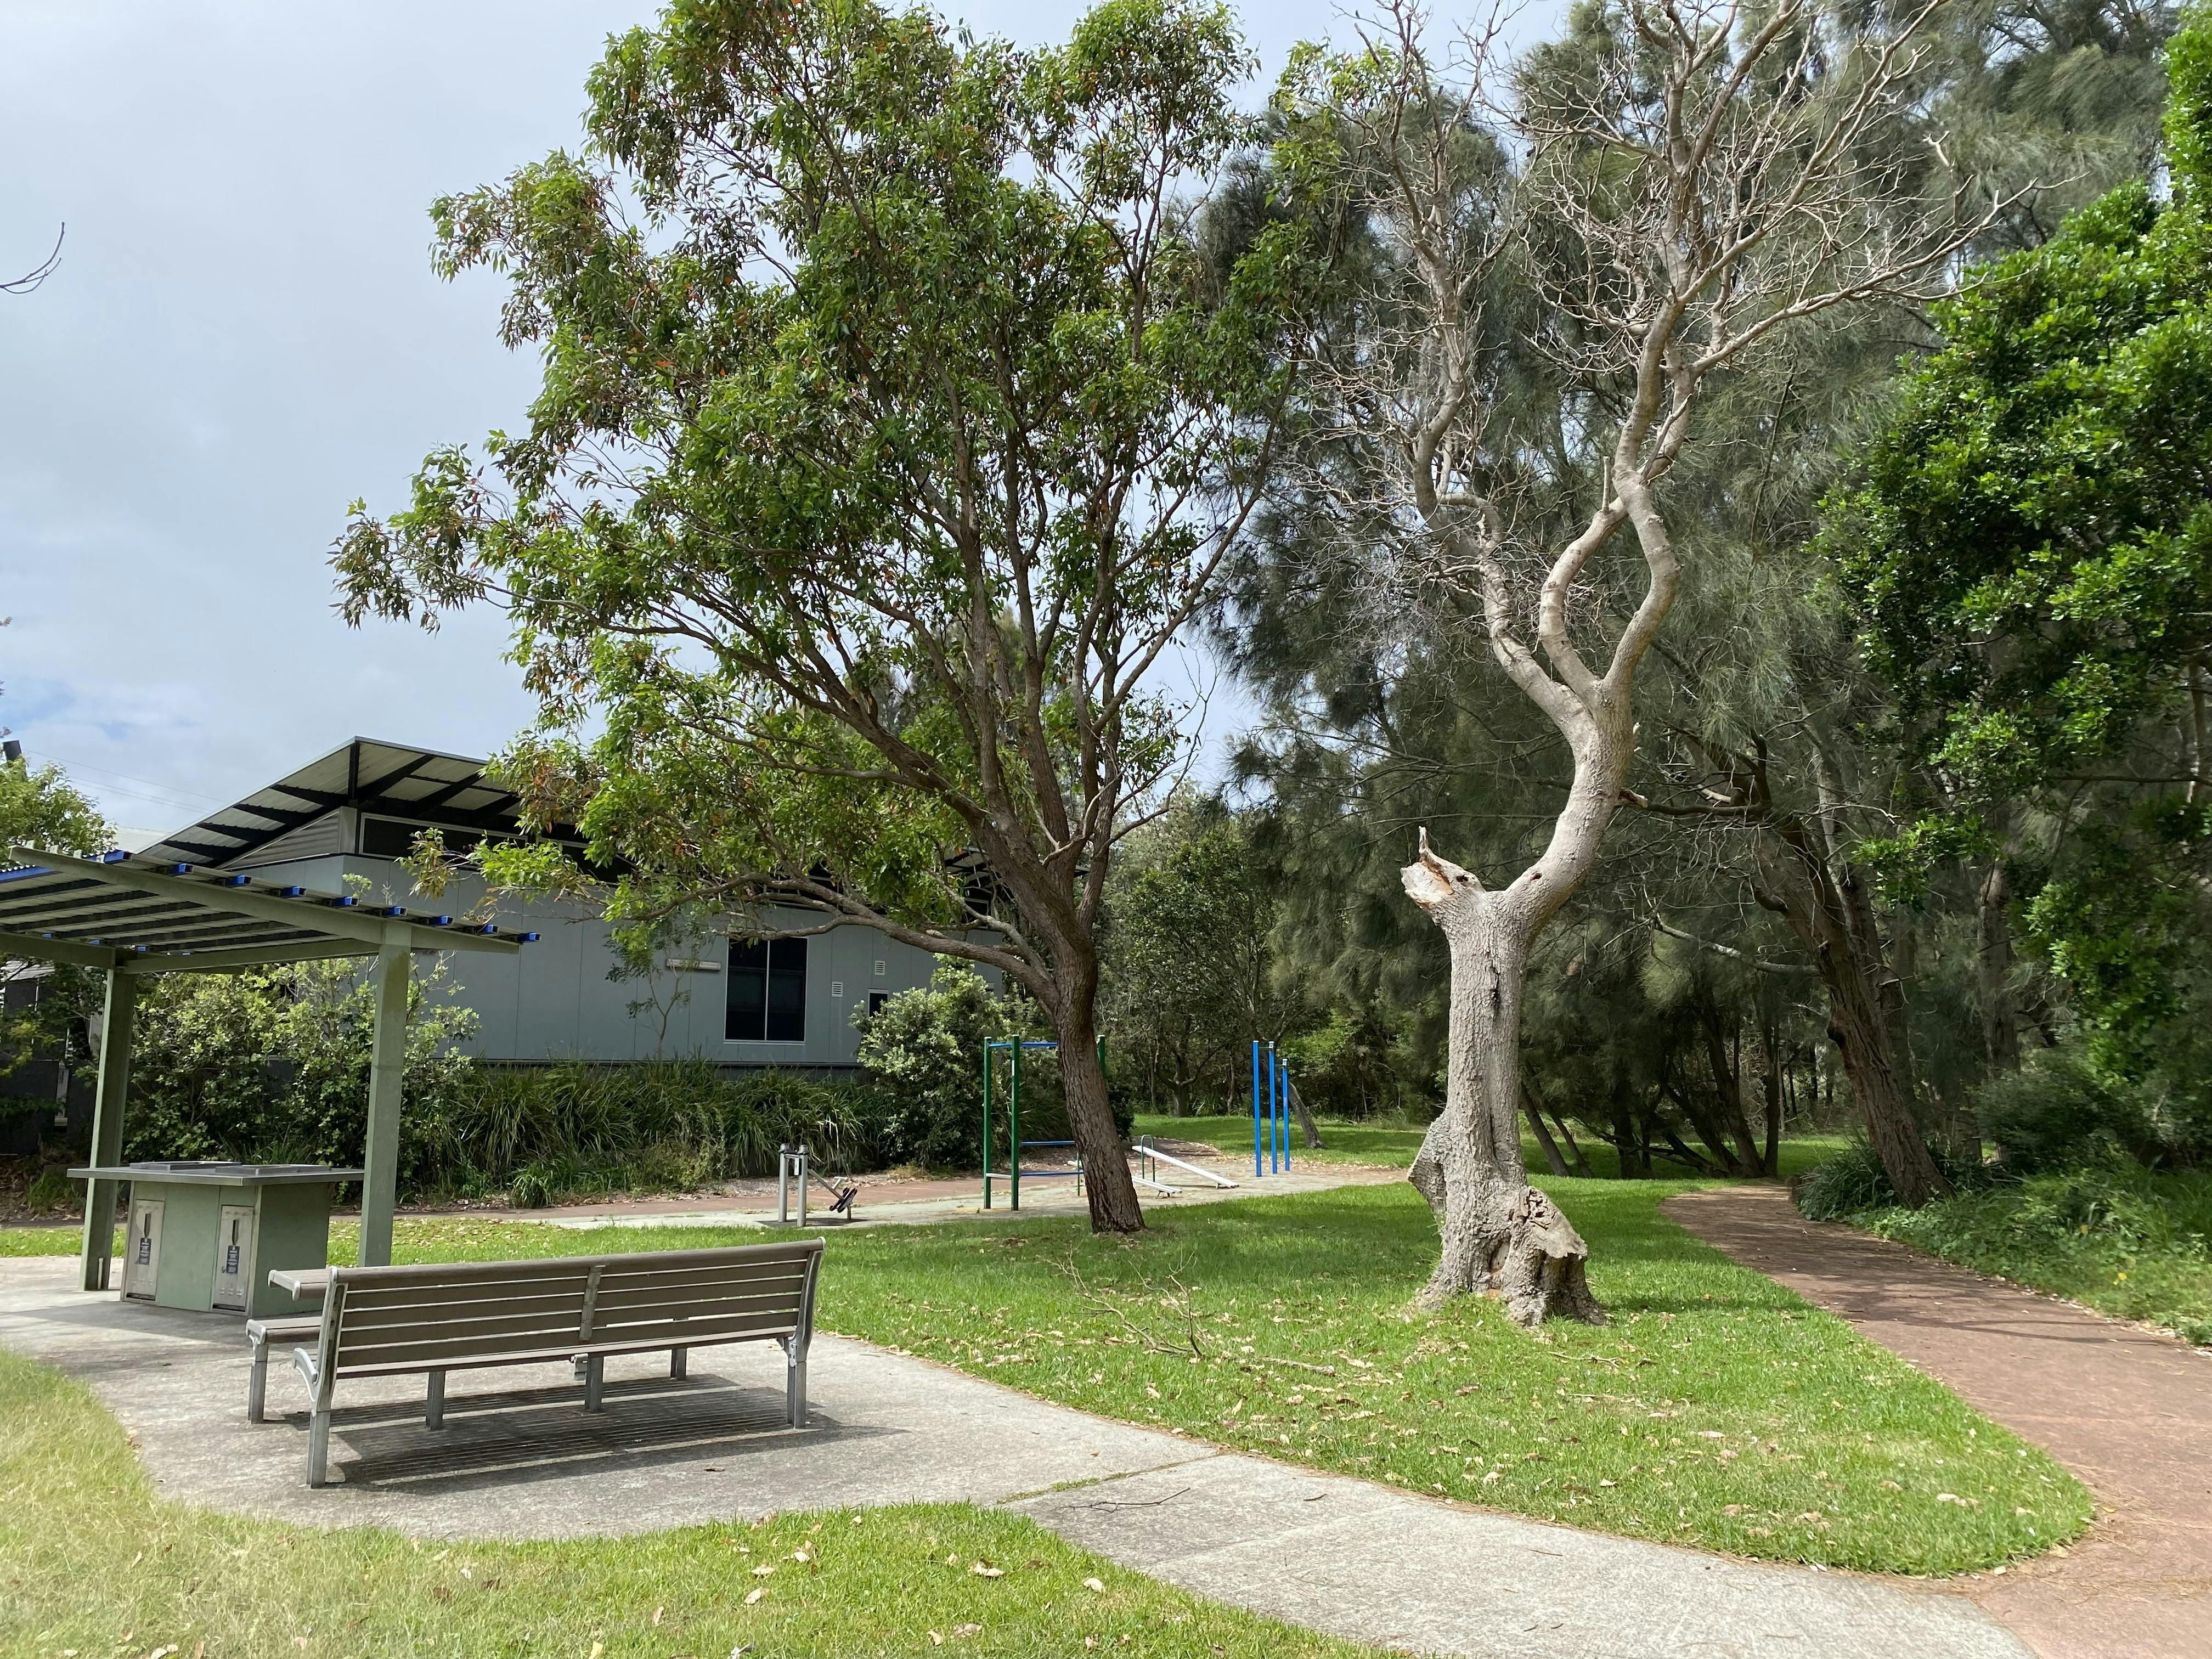 BBQ, Picnic area and fitness equipment at the northern end of Marton Park 